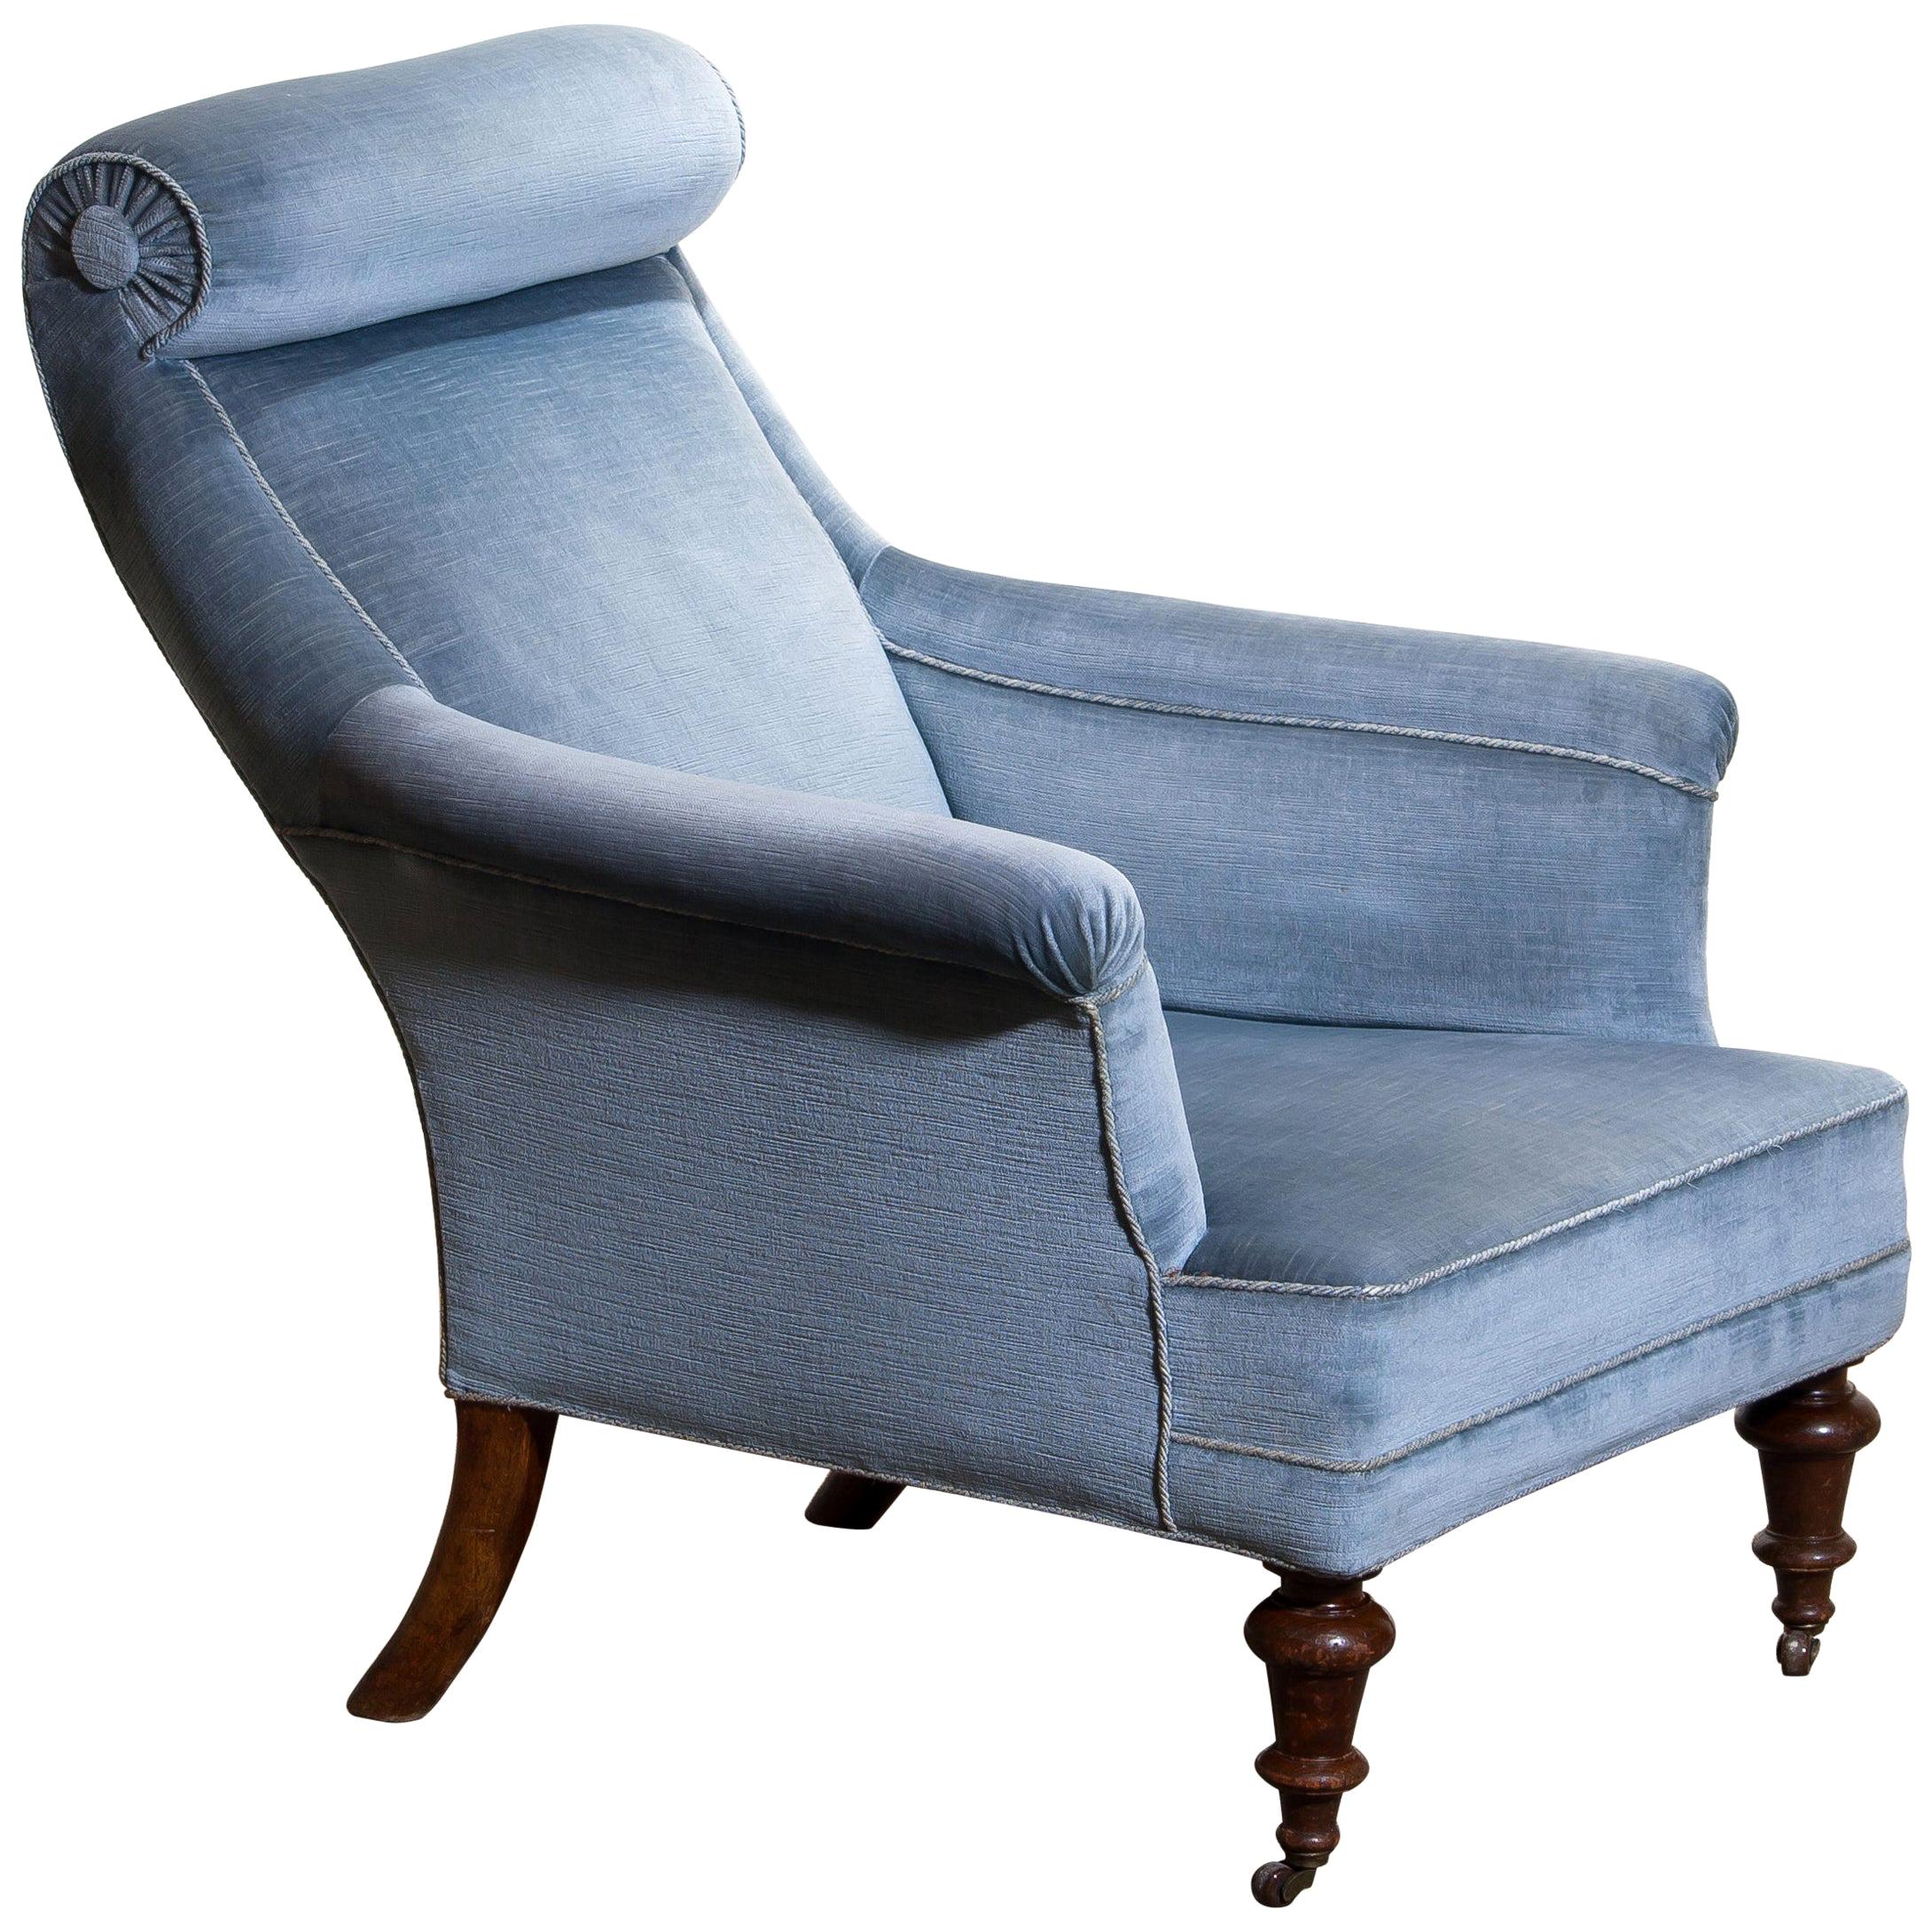 Rare and extremely comfortable / beautiful bergère or lounge chair in Dorothy Draper style from the turn to the 20th century.
Upholstered in ice blue velvet and in good condition.

Period: 1900.